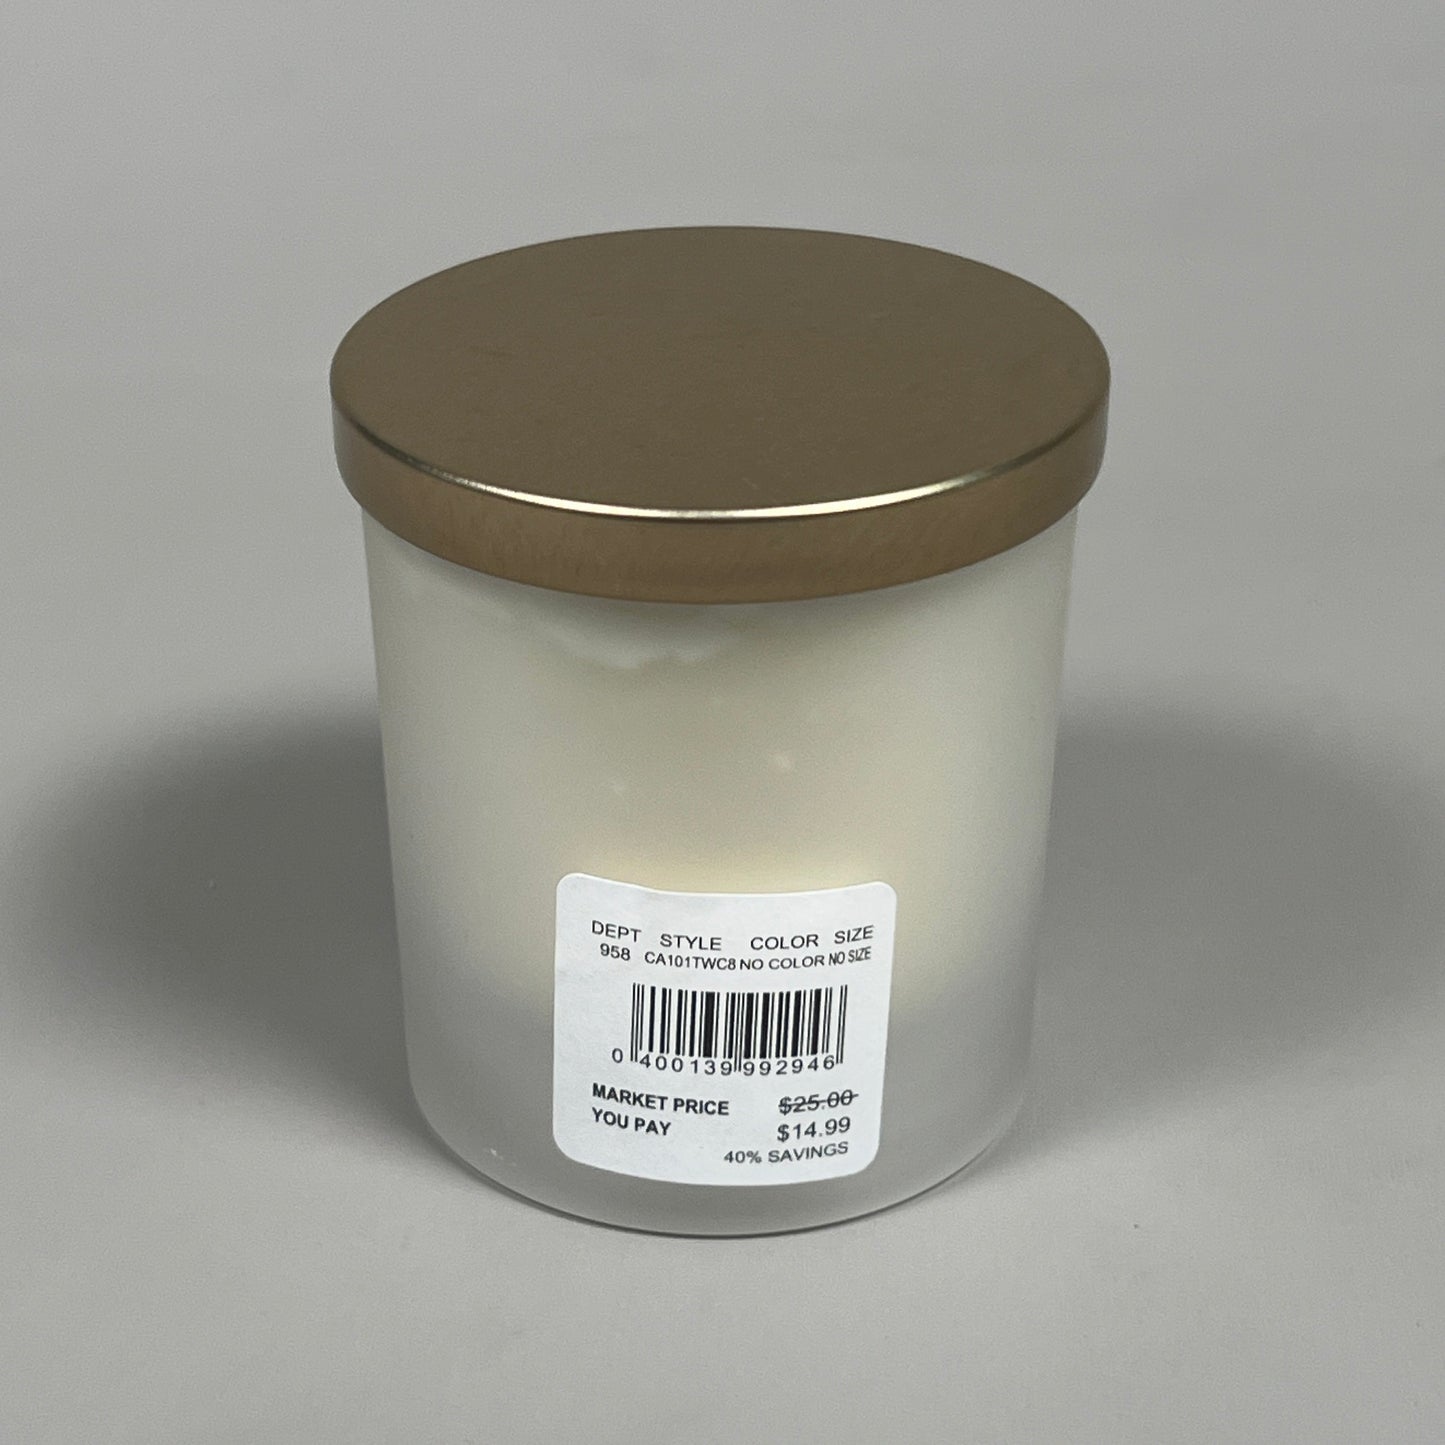 SAKS FIFTH AVENUE Twisted Coconut Hand Poured Soy Wax Candle 8 fl oz LOT OF 4! (New)